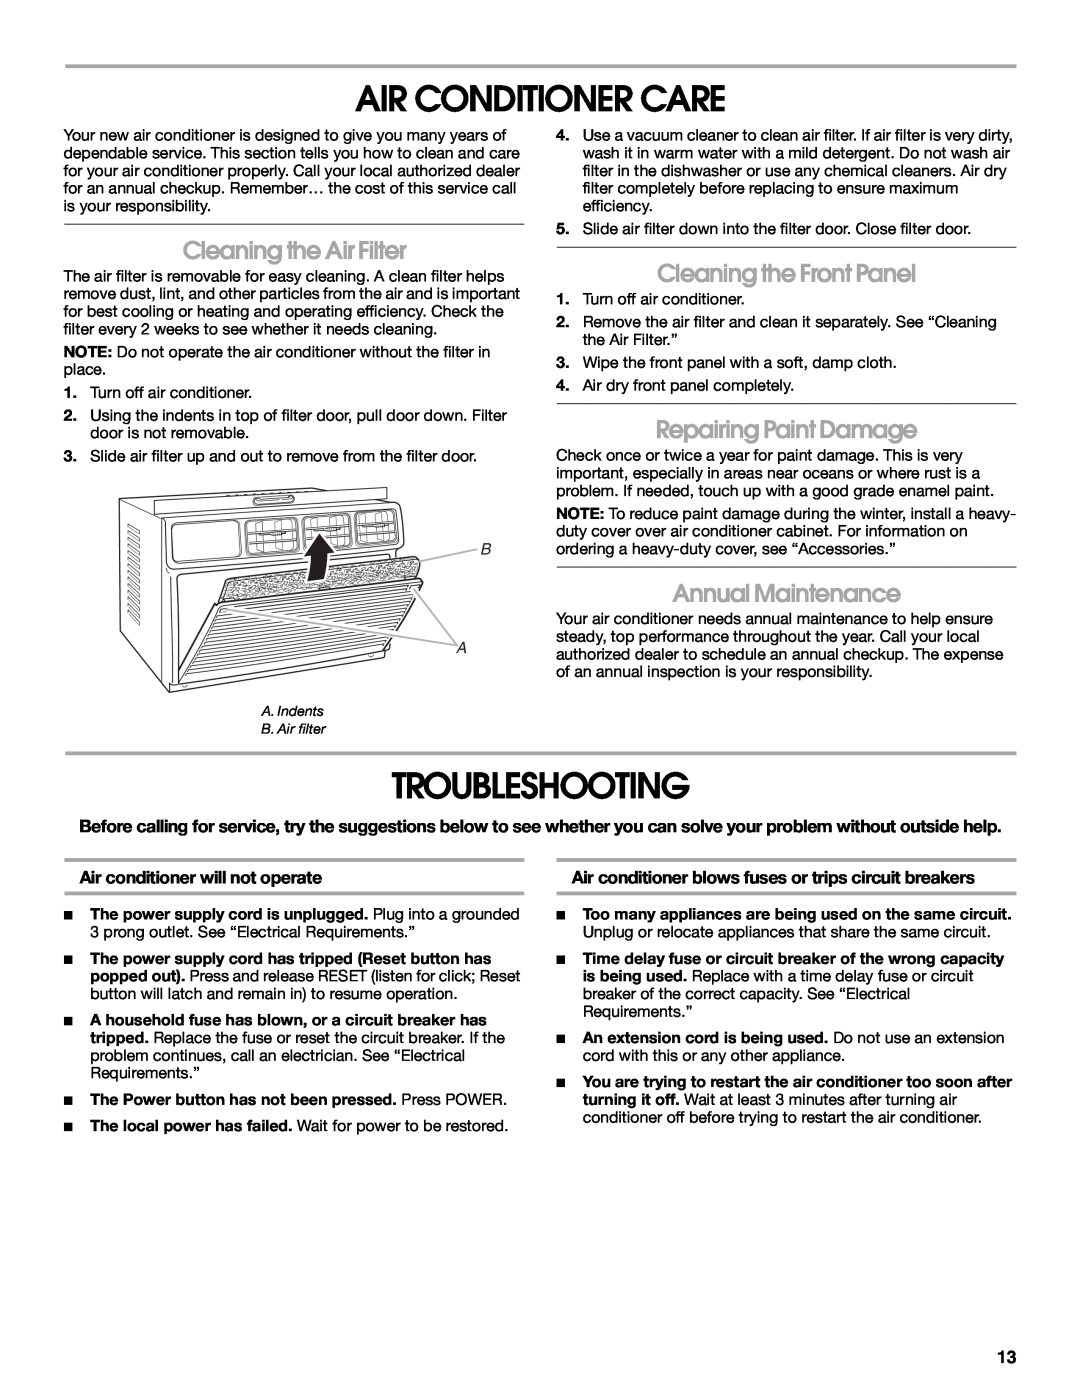 Whirlpool ACC082XR0 manual Air Conditioner Care, Troubleshooting, Cleaning the Air Filter, Cleaning the Front Panel 